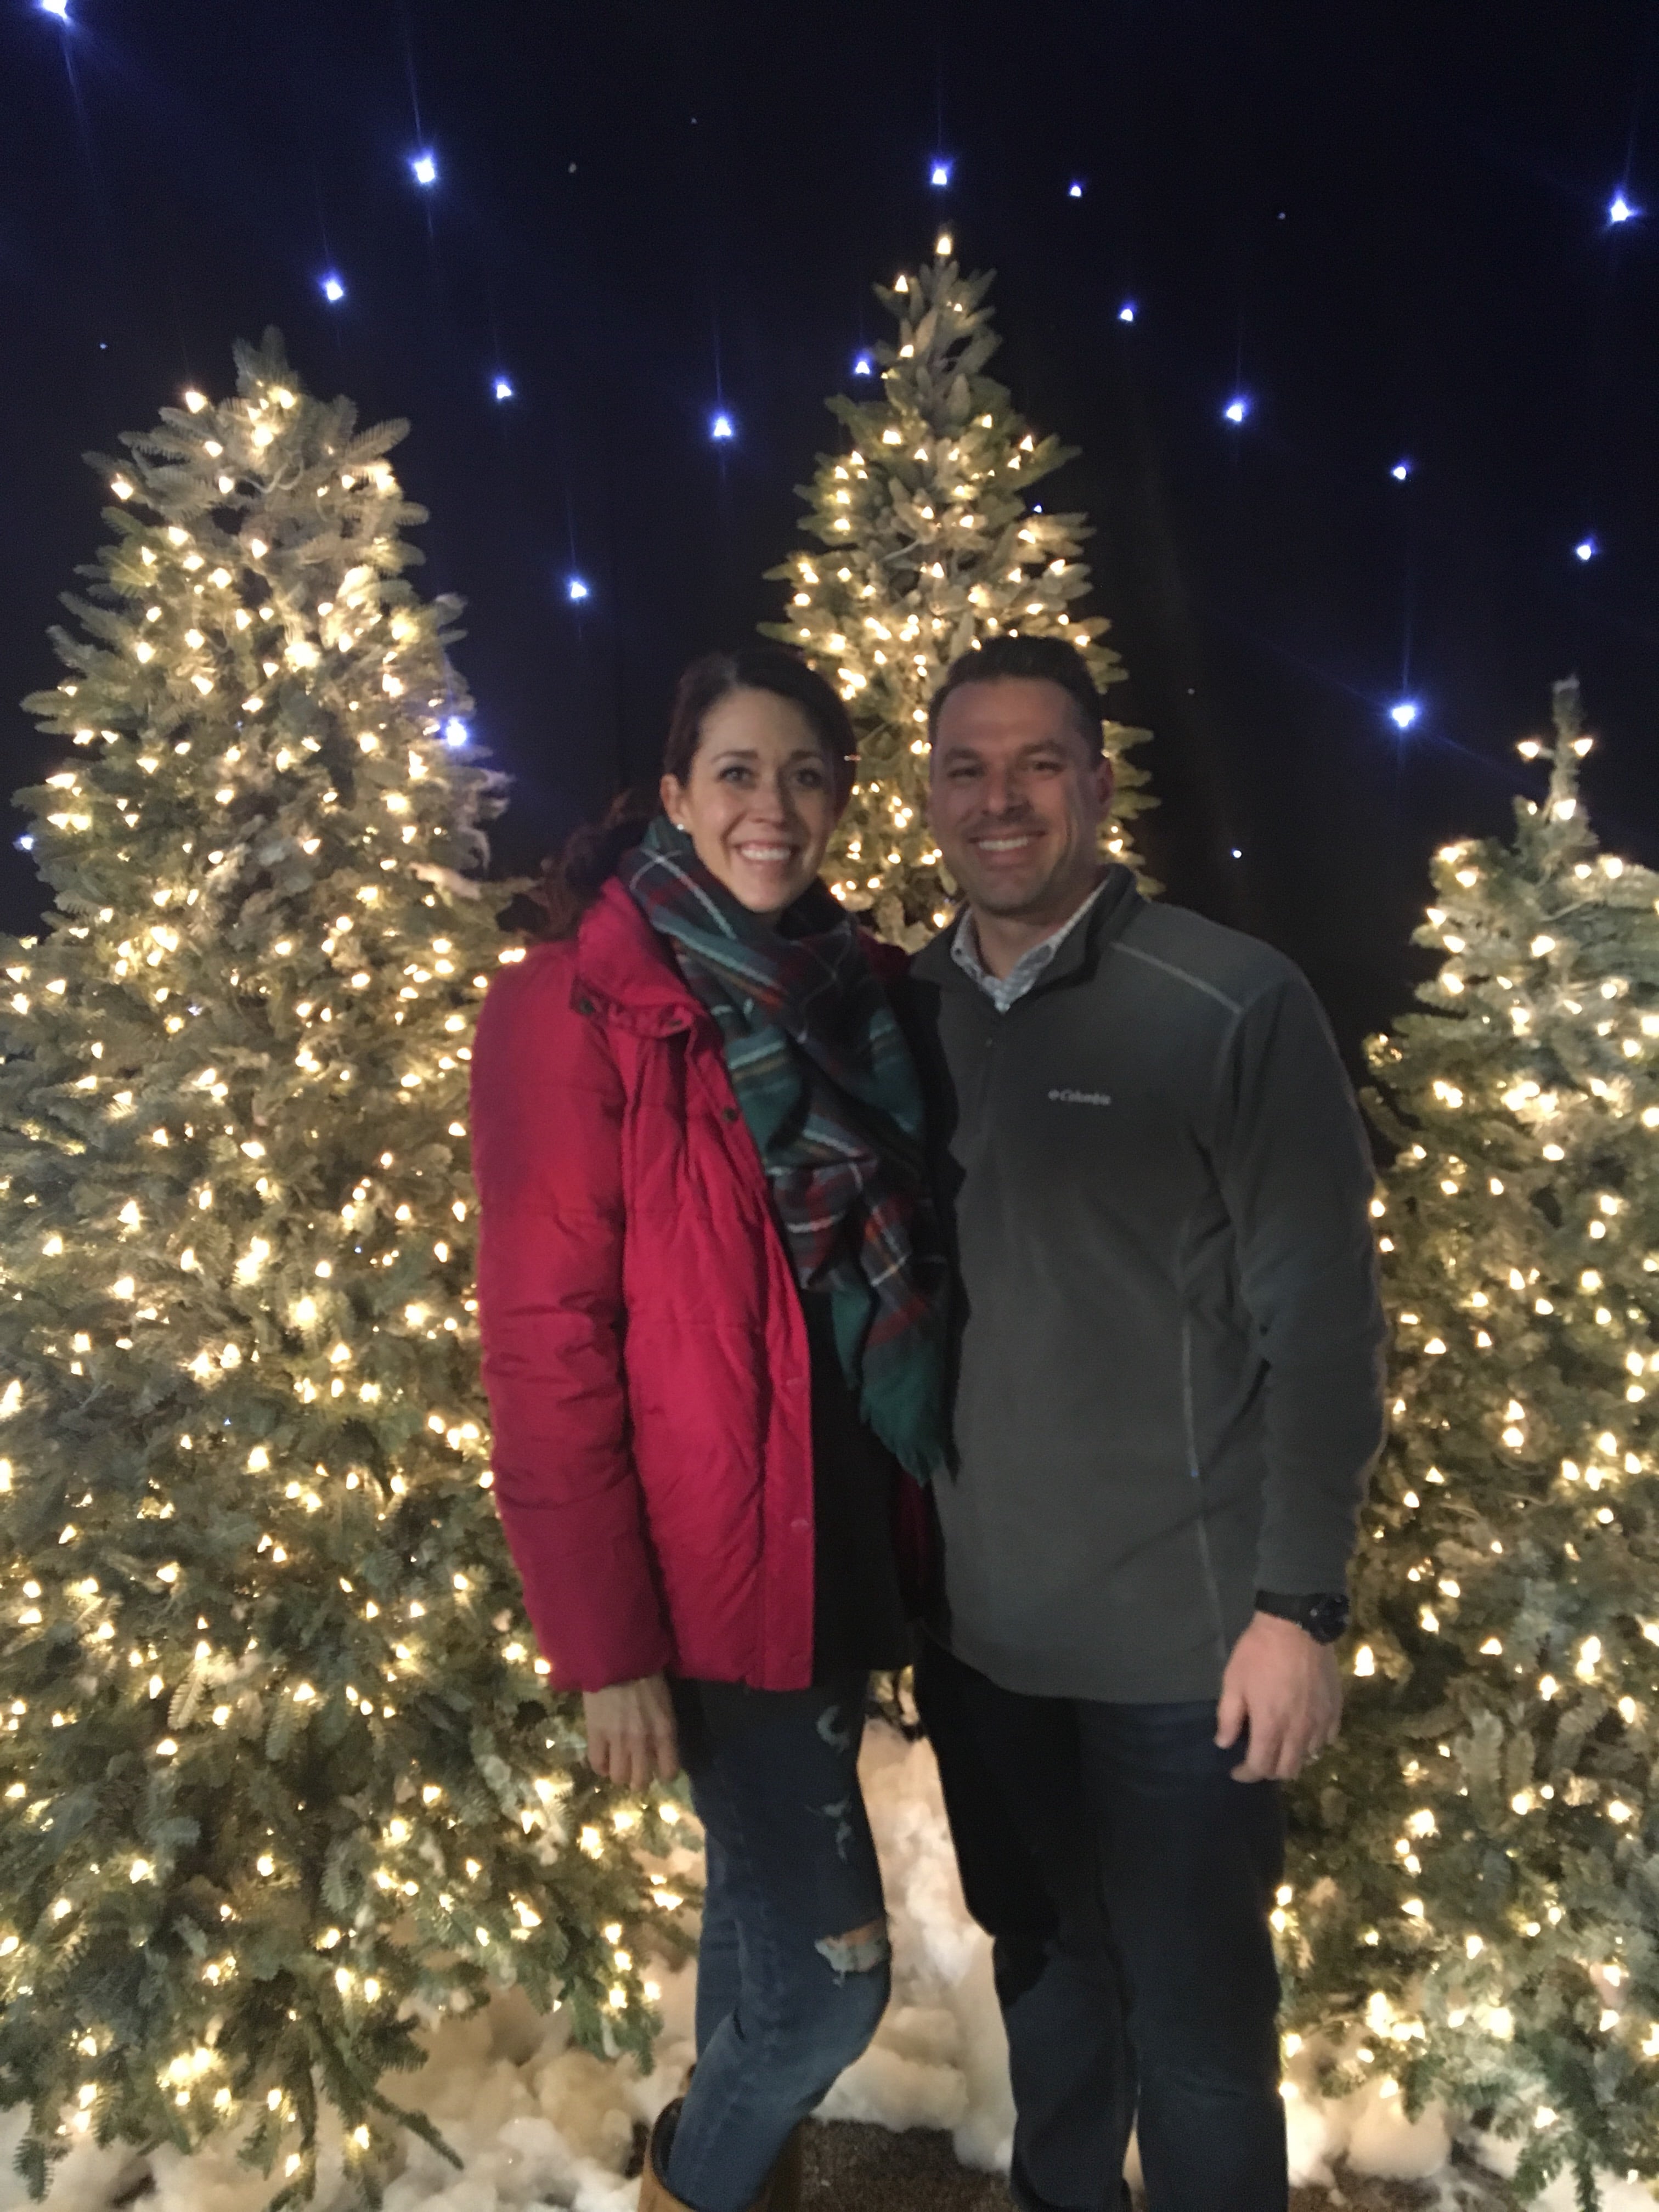 lady and man in front of lit Christmas trees